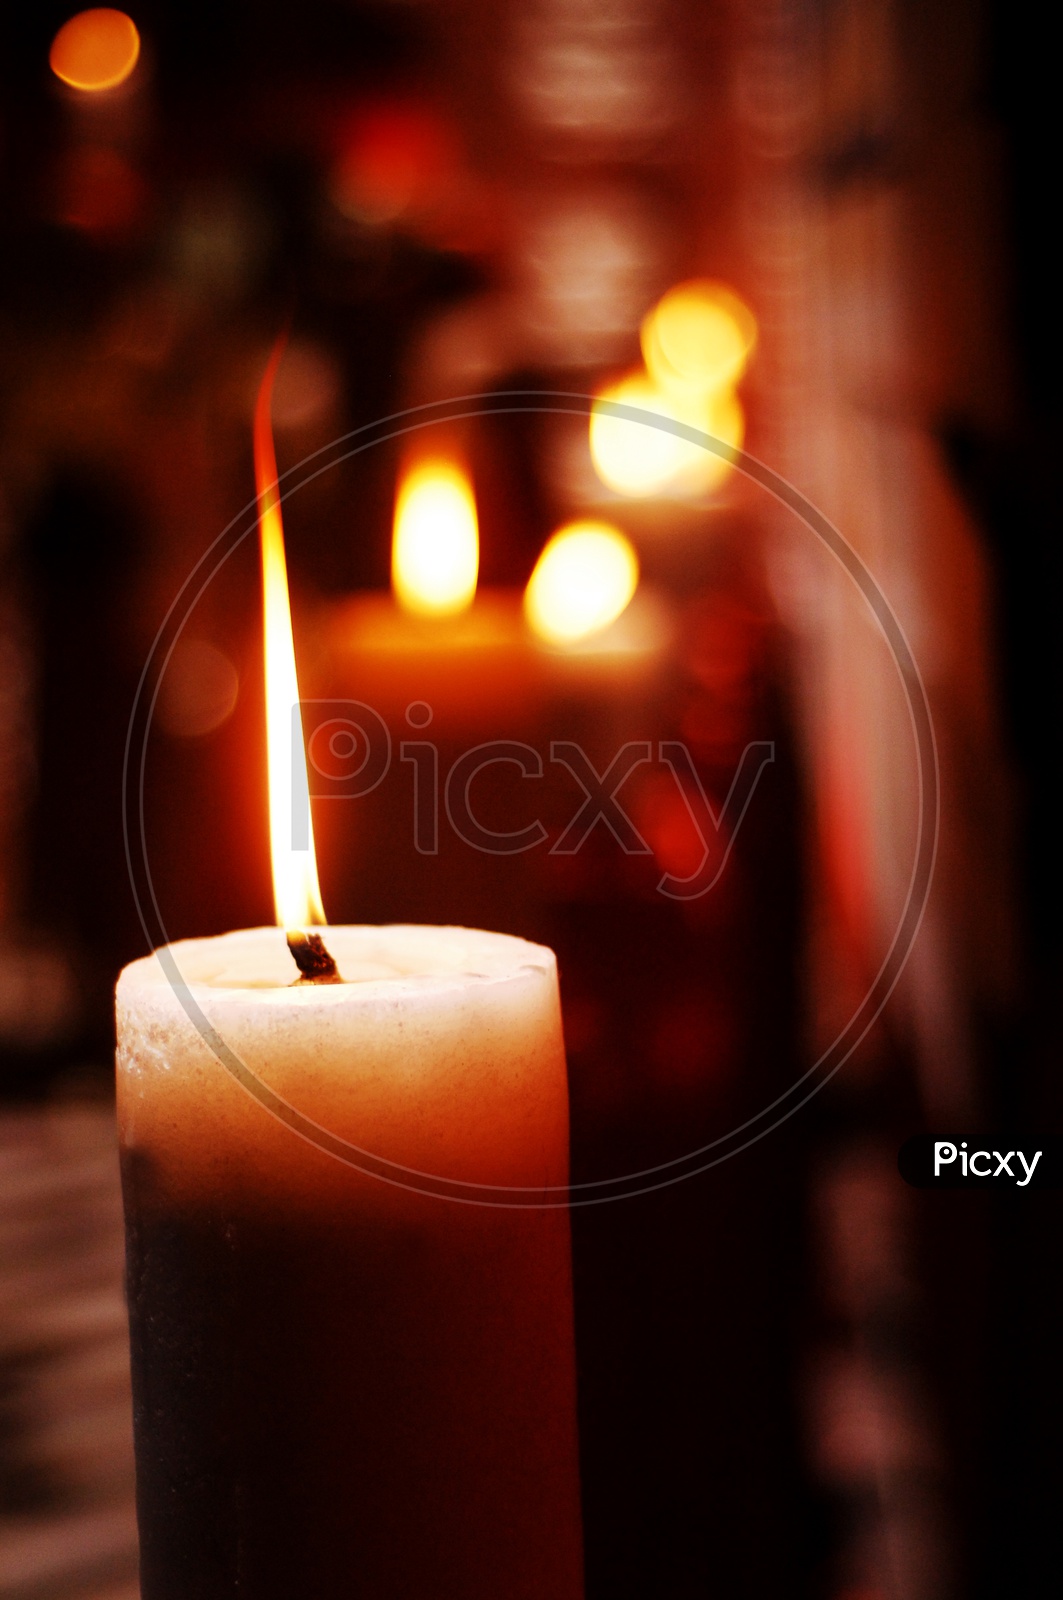 Wax Candles Lighted In Dark